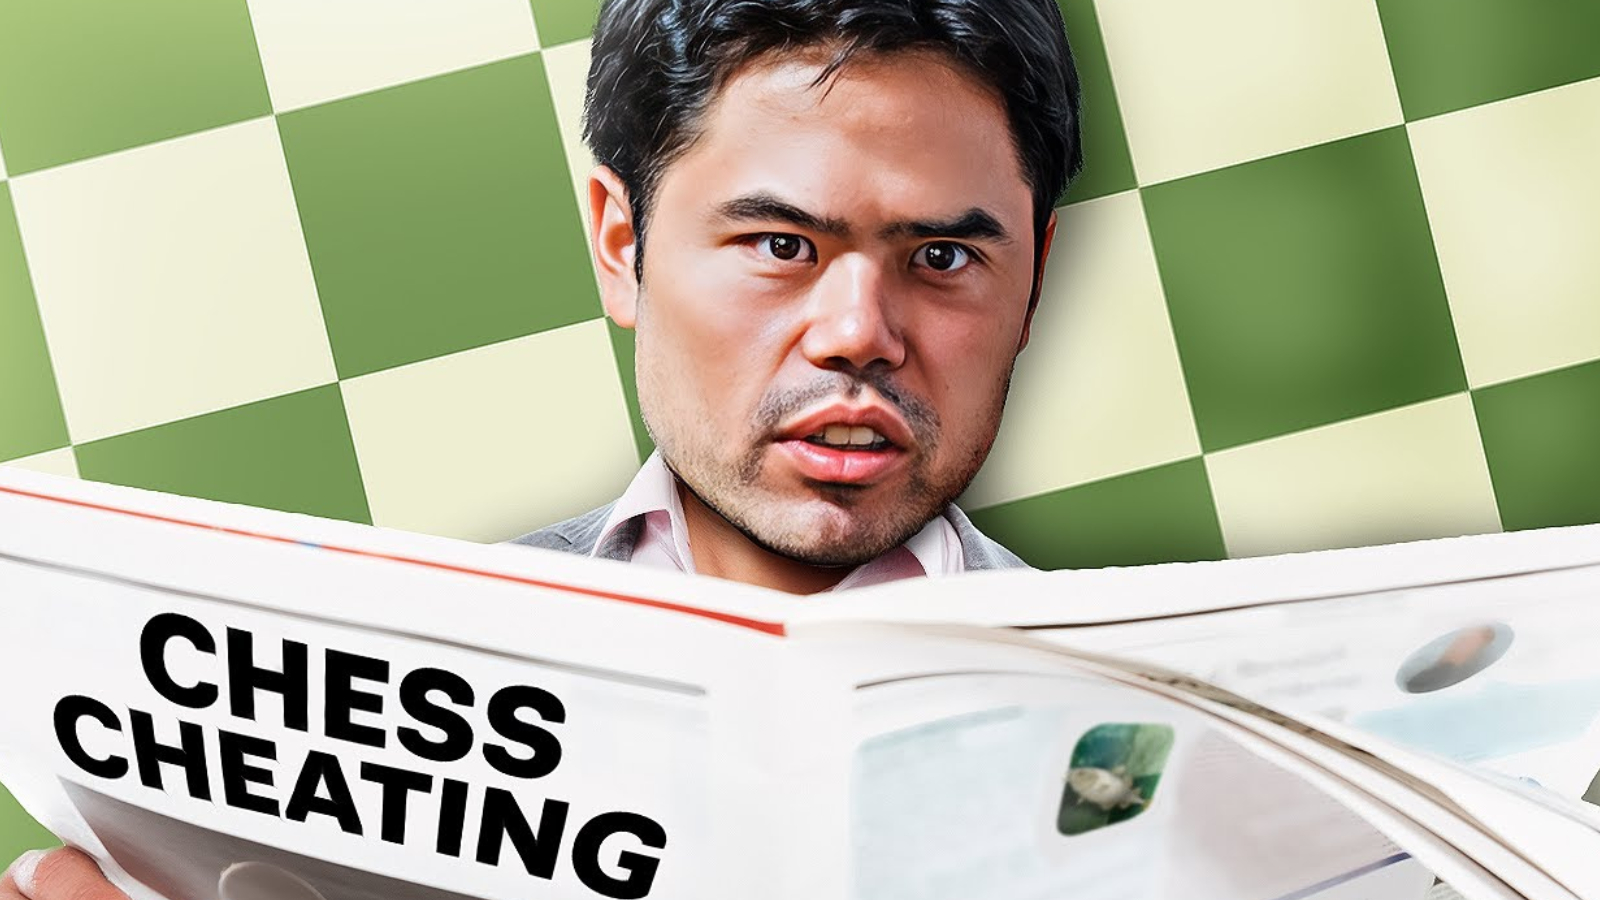 World of Chess rocked by a second scandal: Grandmasters go to war as  American champion Hikaru Nakamura is accused of cheating by rival after 46- game winning streak